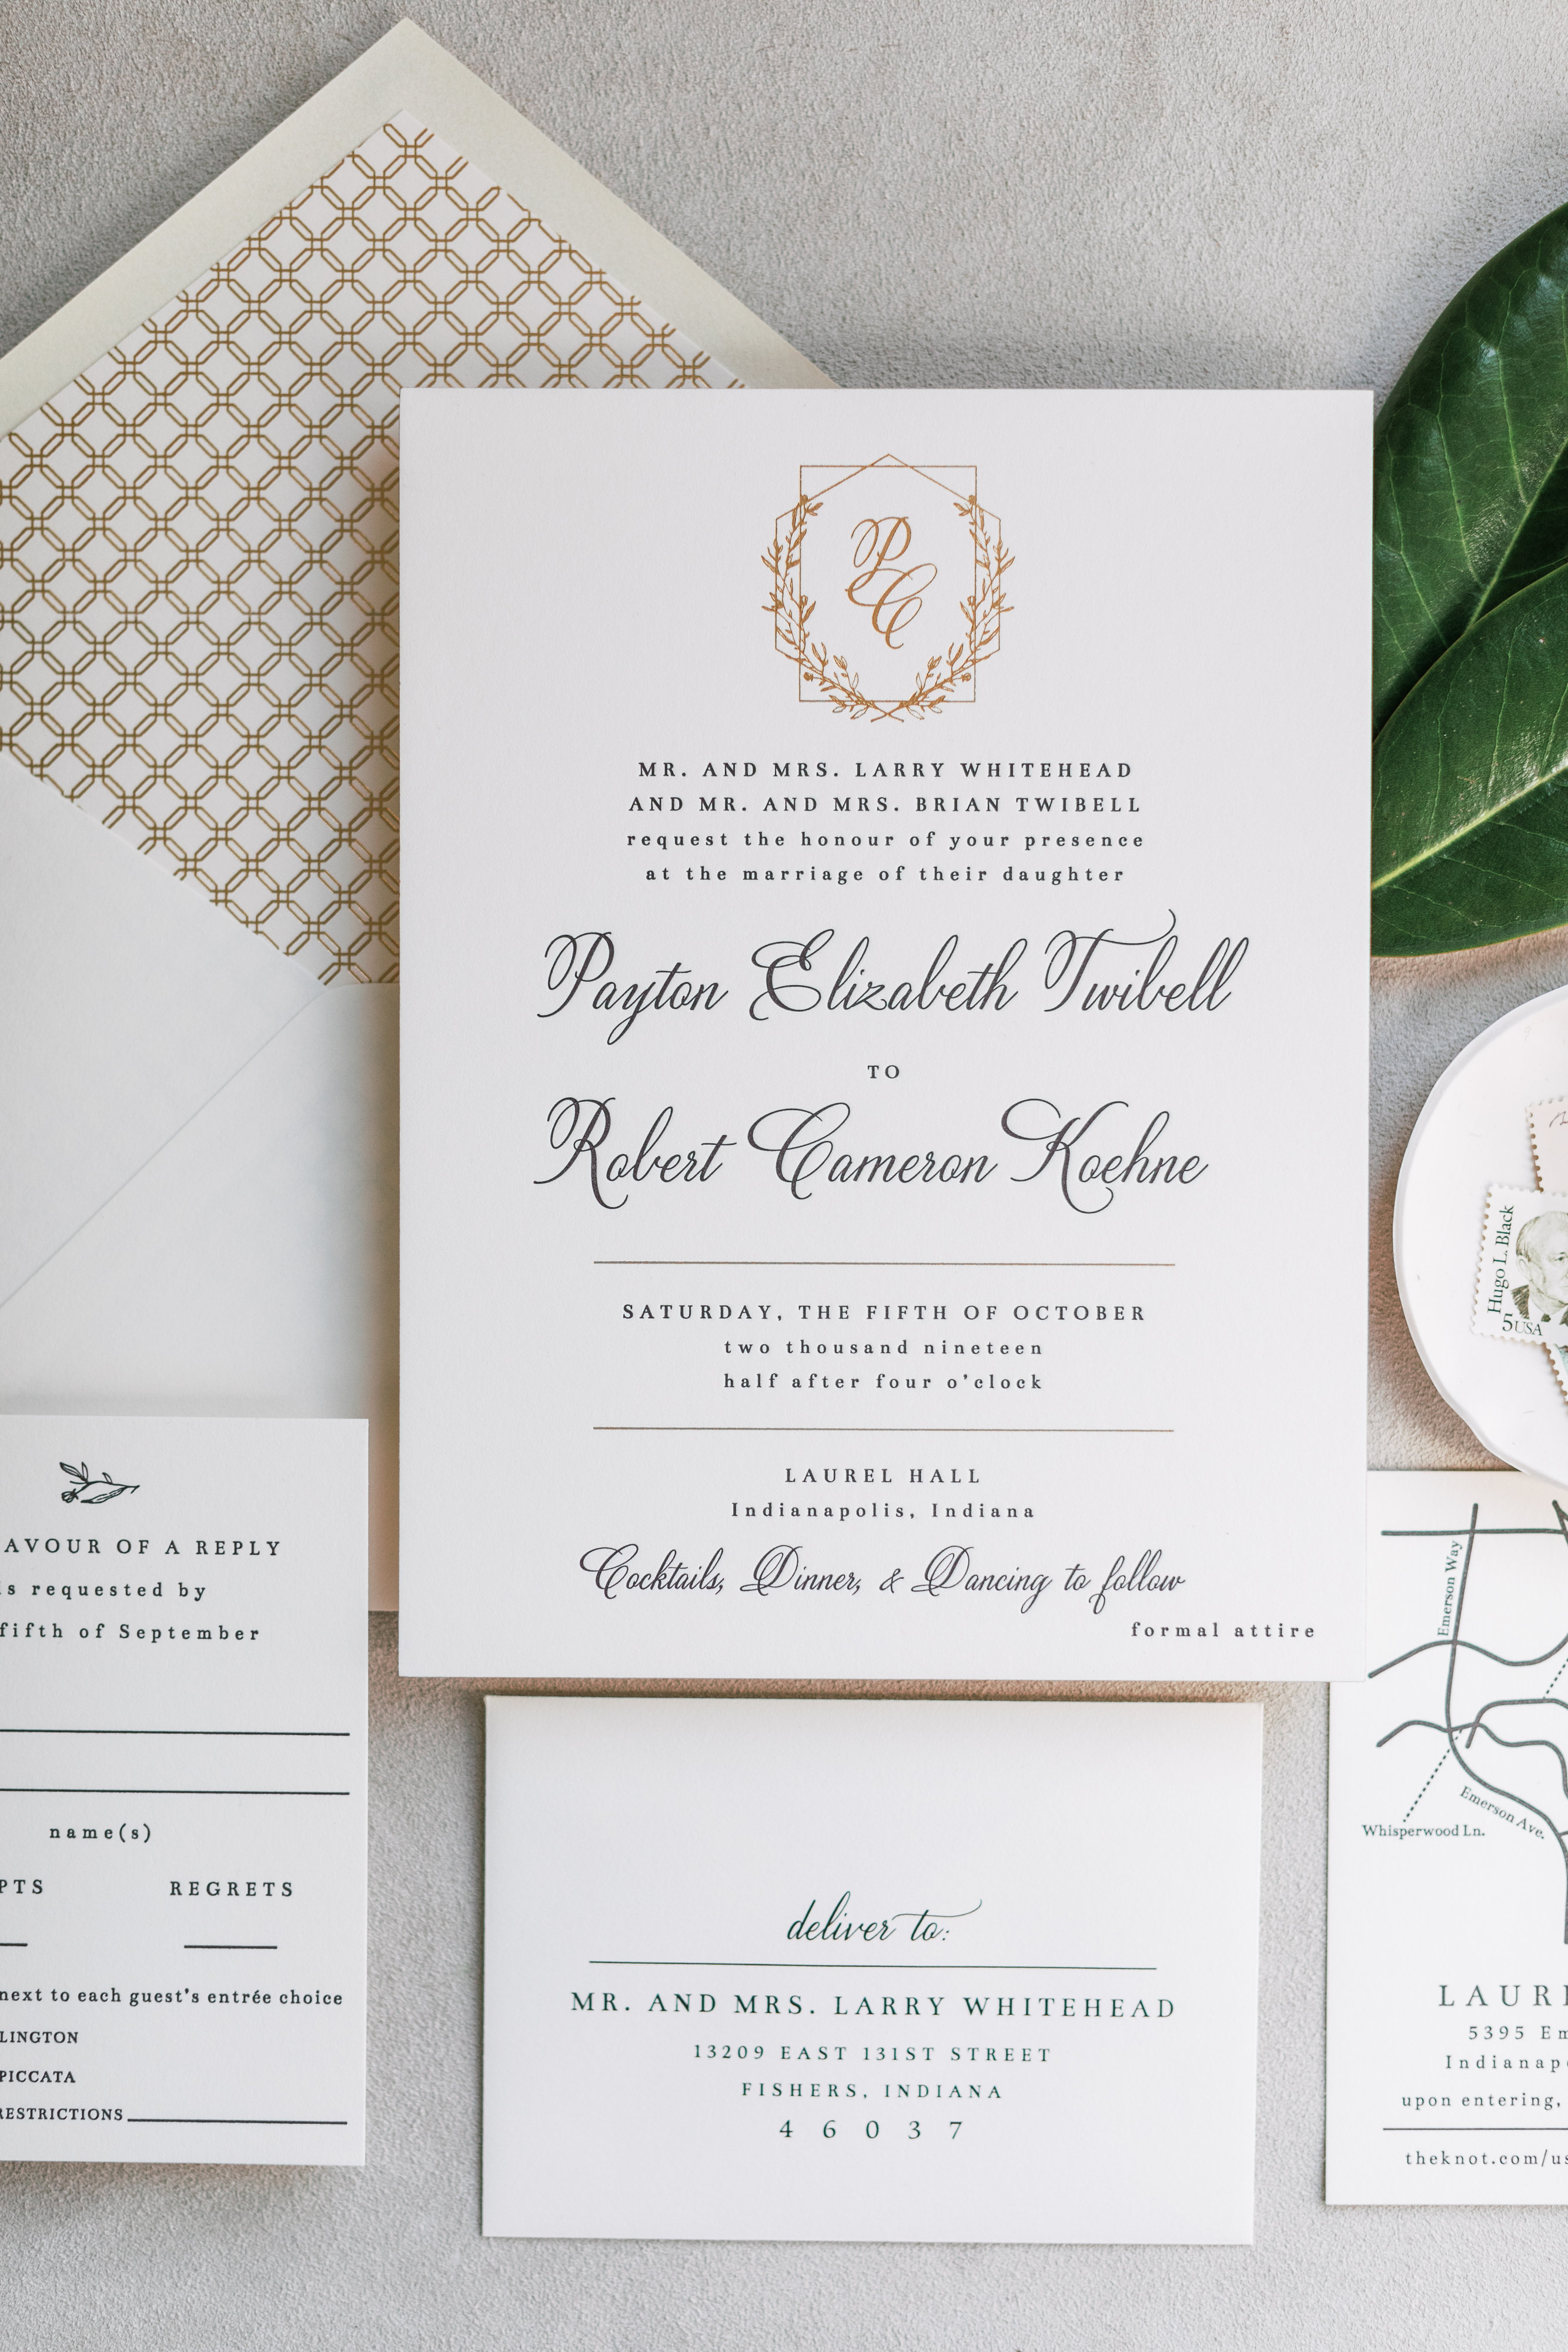 Classic, white and gold wedding stationery suite designed by Oliver's Twist in Carmel, Indiana.